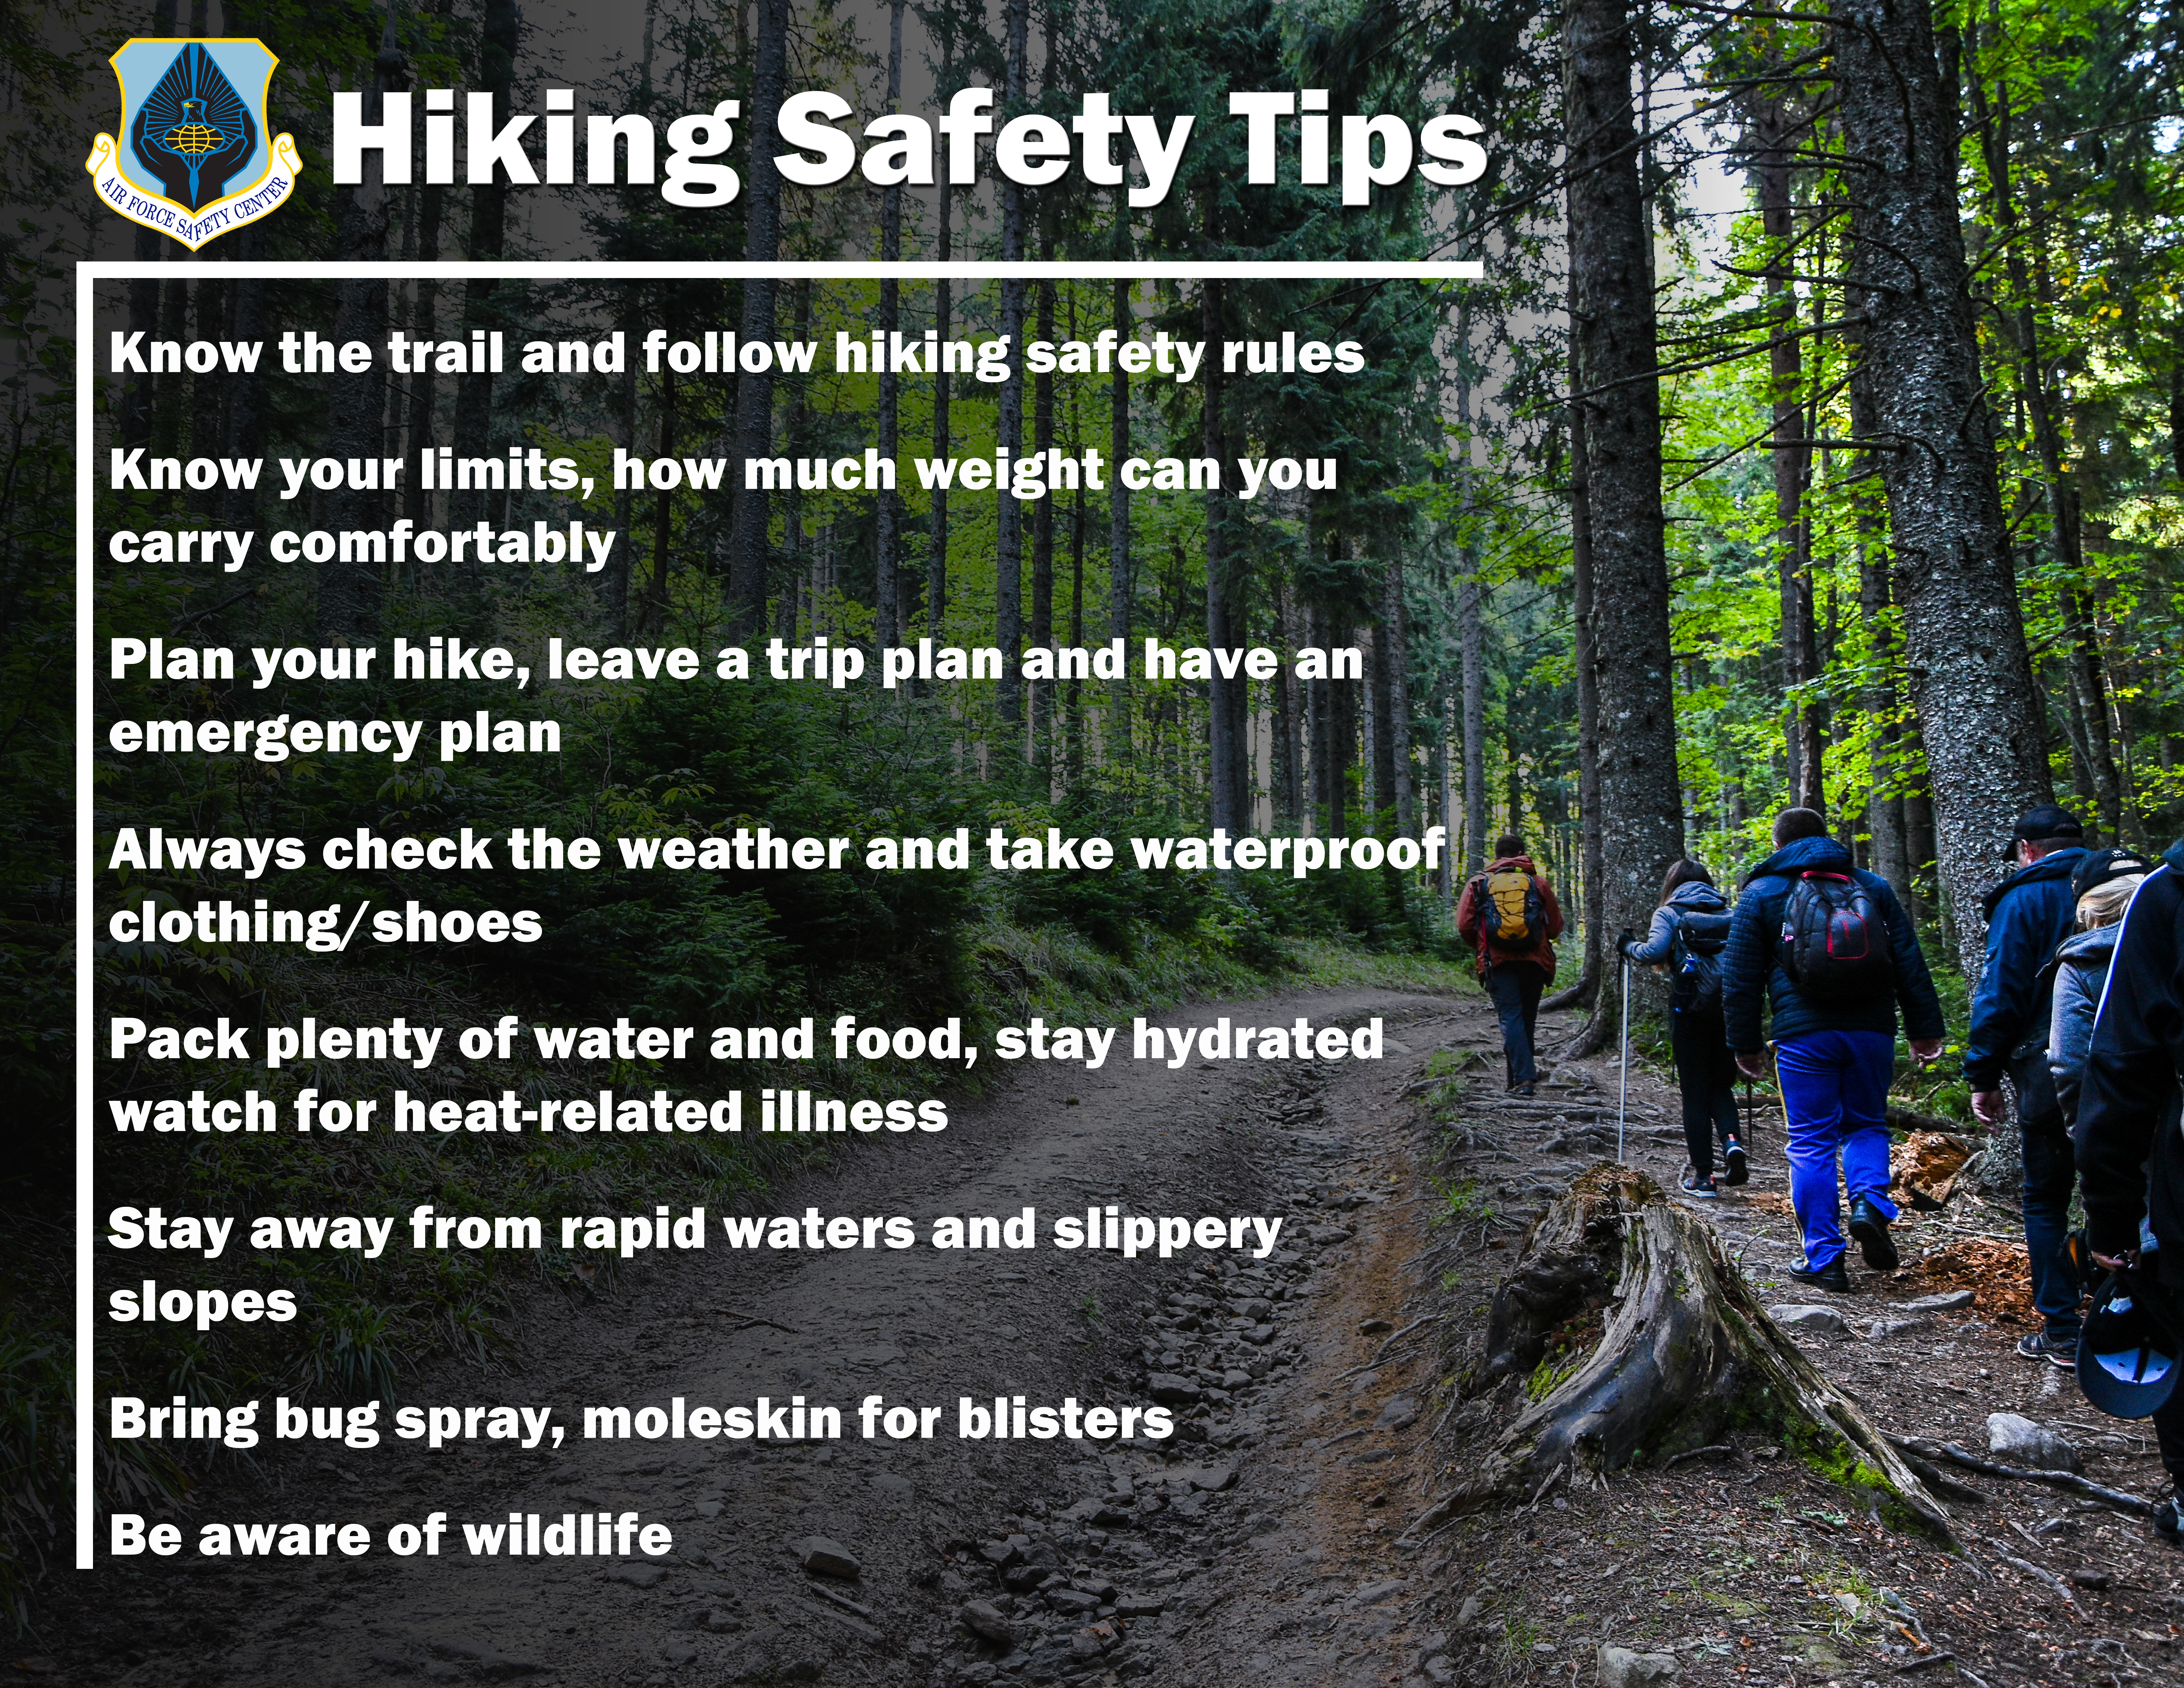 Hiking Safety Tips - group of people hiking up a mountain trail